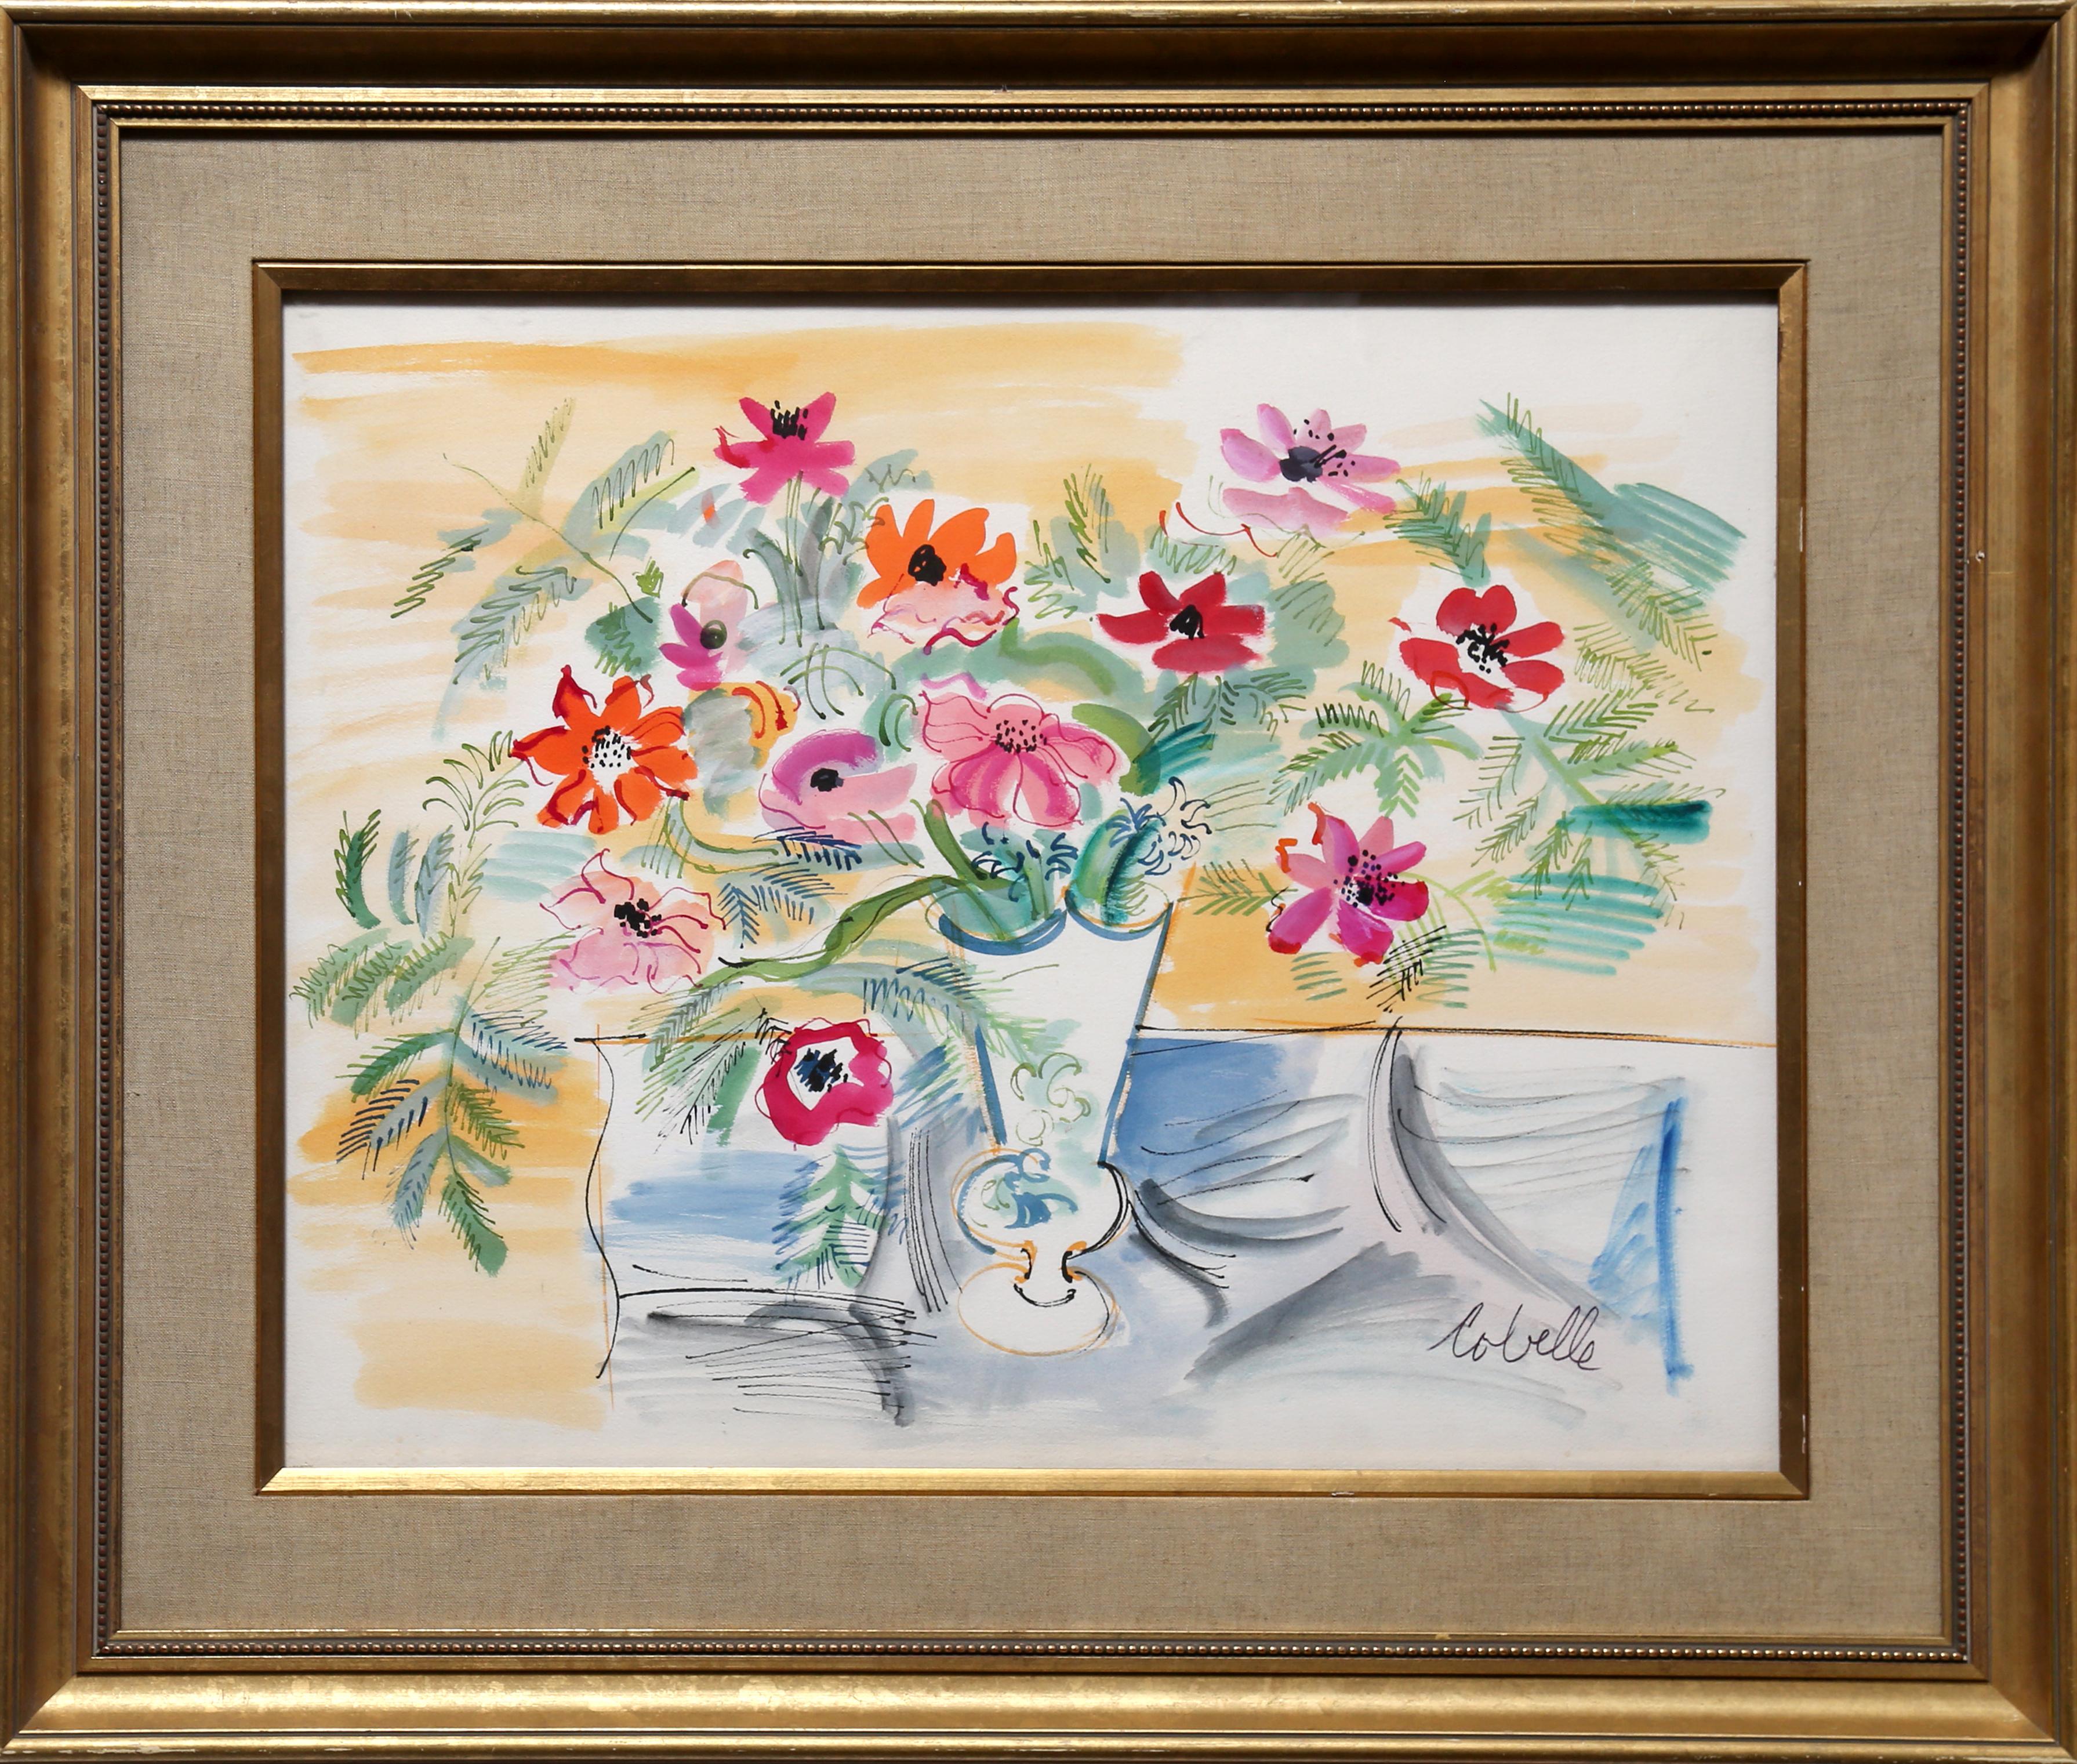 "Fleurs" is an original watercolor paintng on paper by French artist, Charles Cobelle (1902 - 1994), signed lower right.  The painting measures 21.5 x 27.5 inches and is framed to 32 x 38 inches.